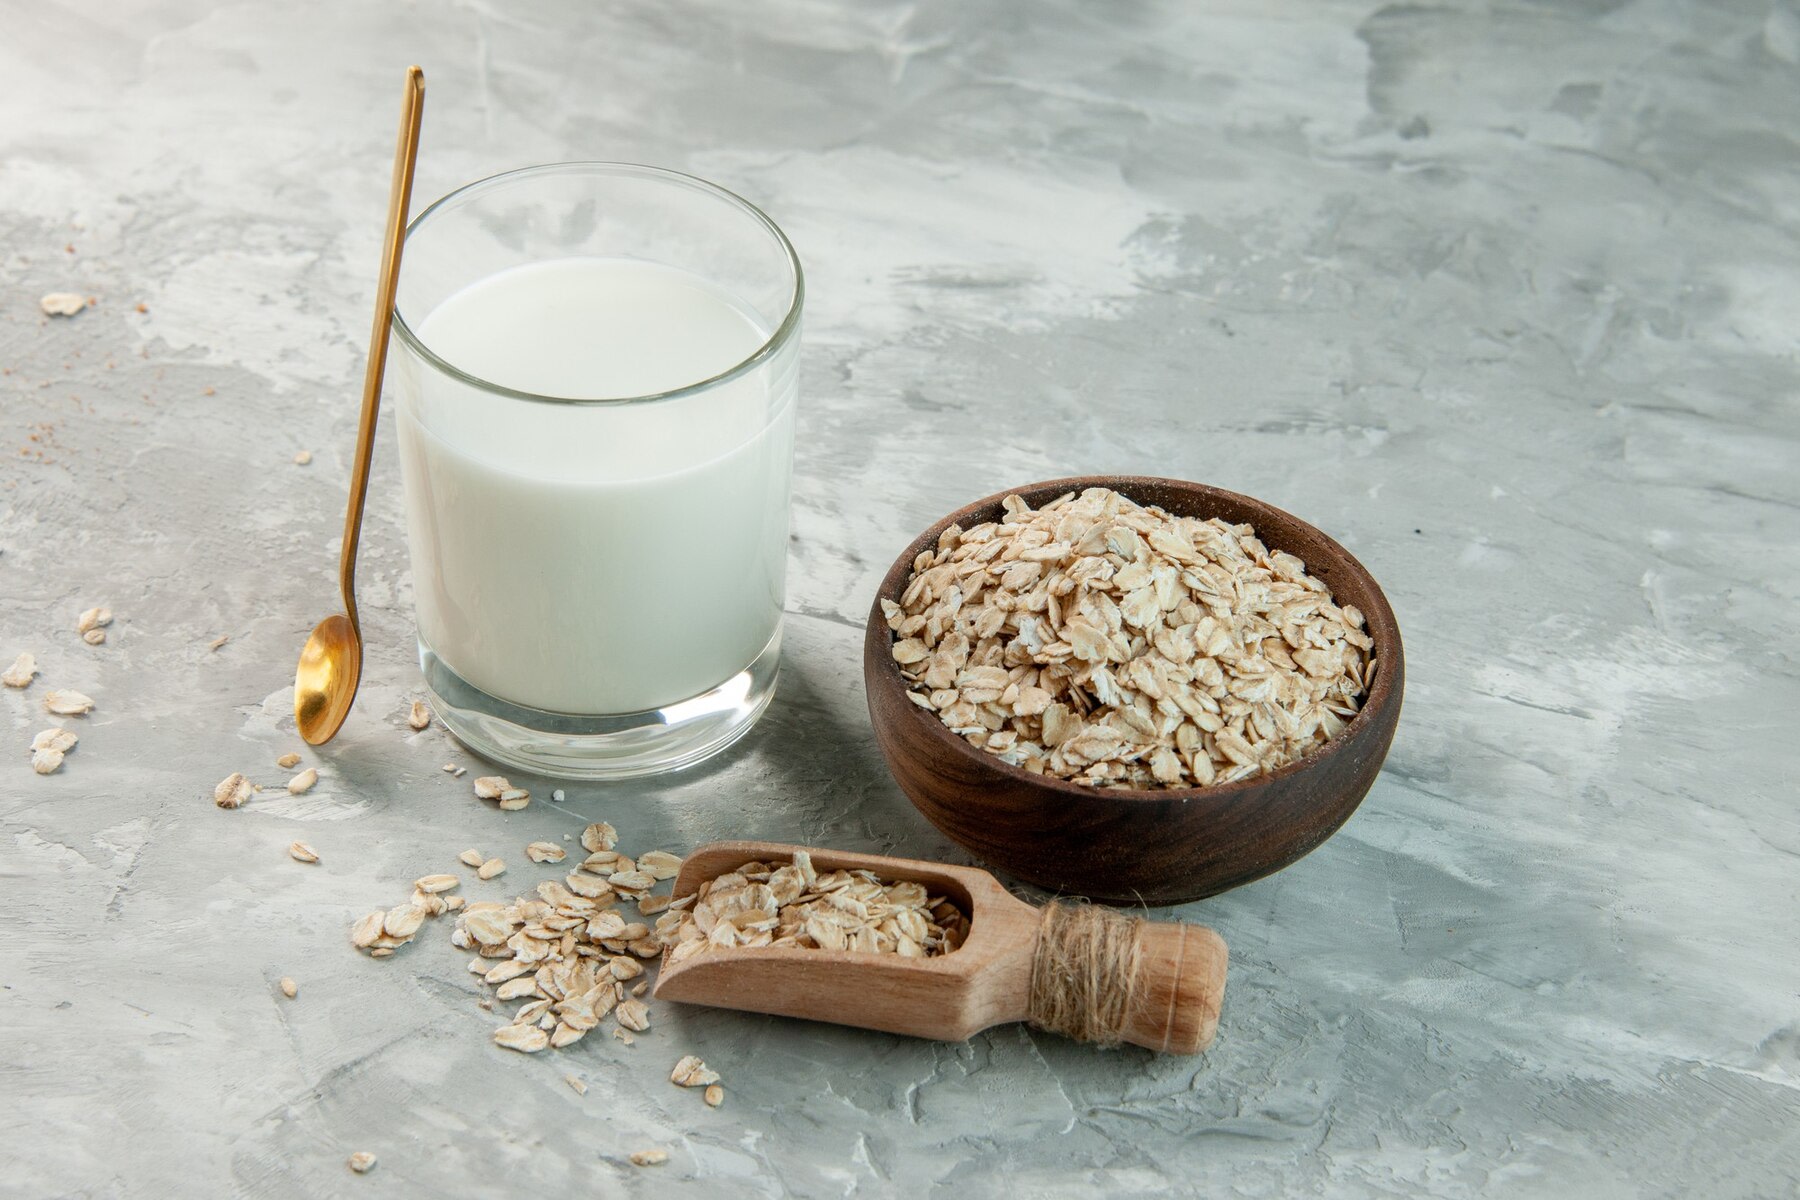 Image of glass filled with oat milk and bowl and scoop of whole oats